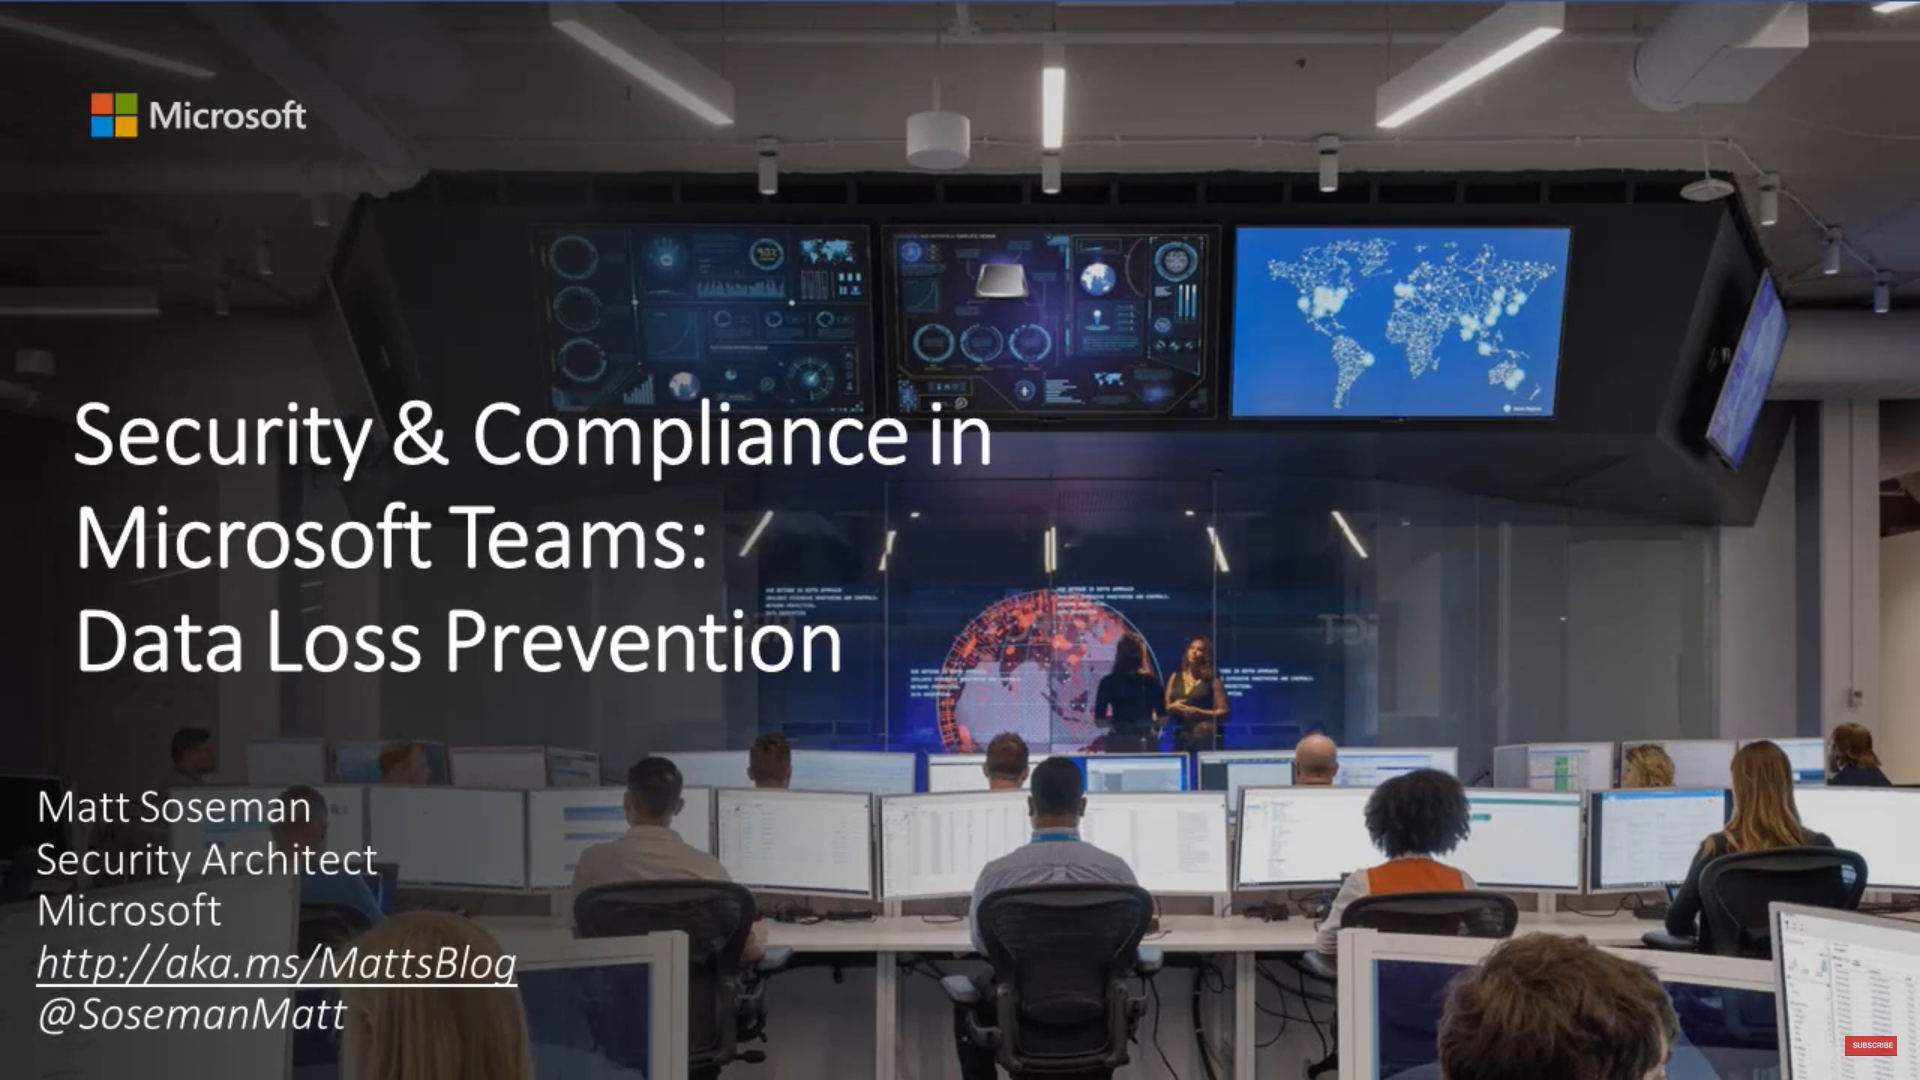 Security and Compliance in Microsoft Teams with Data Loss Prevention